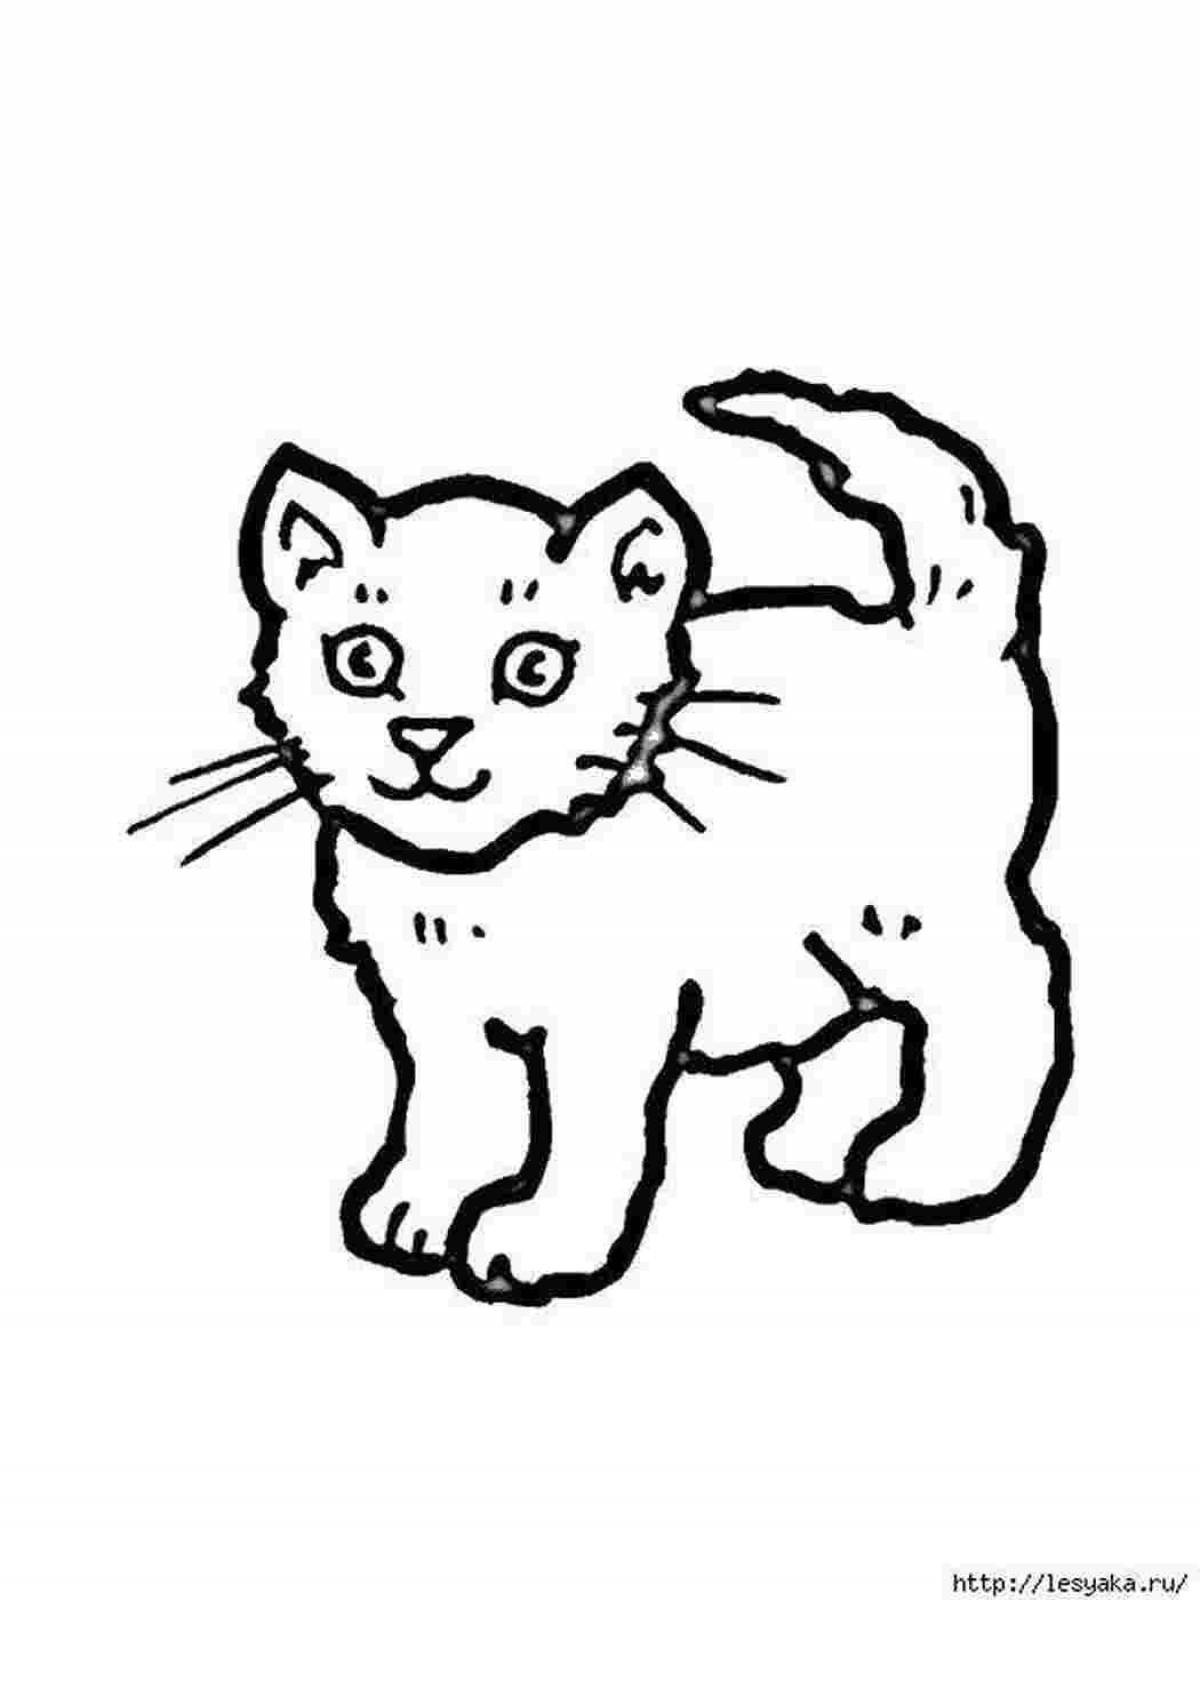 Coloring book funny little cat